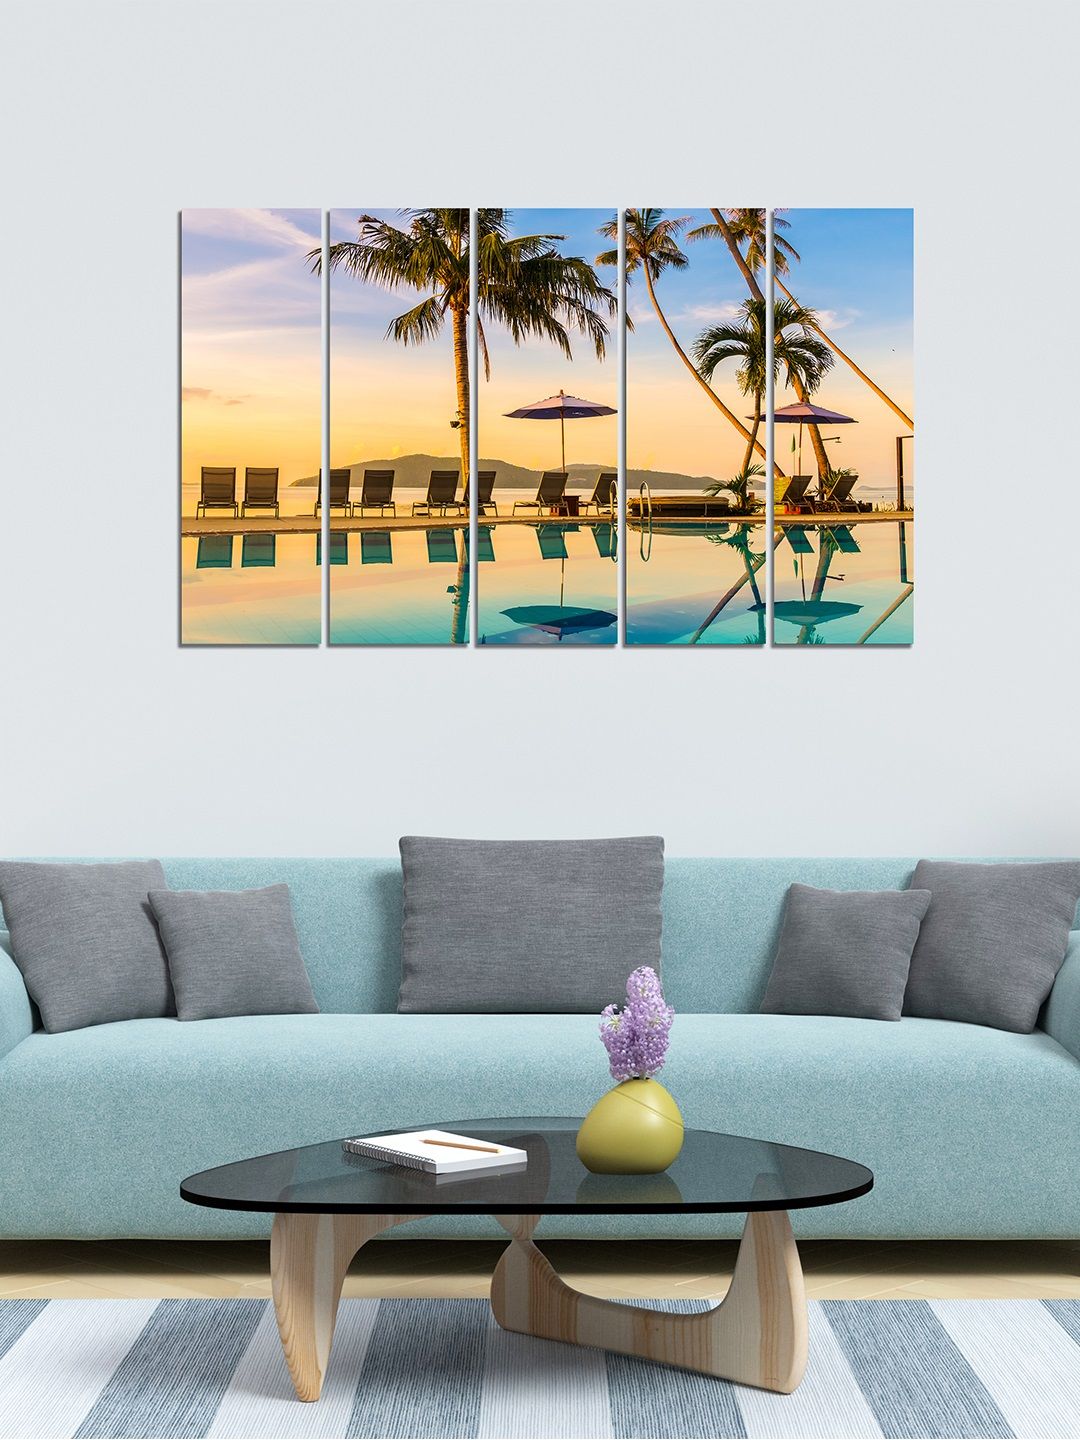 WENS Peach-Coloured & Blue 5 Panelled Beach View Velvet Laminated Wall Painting Price in India